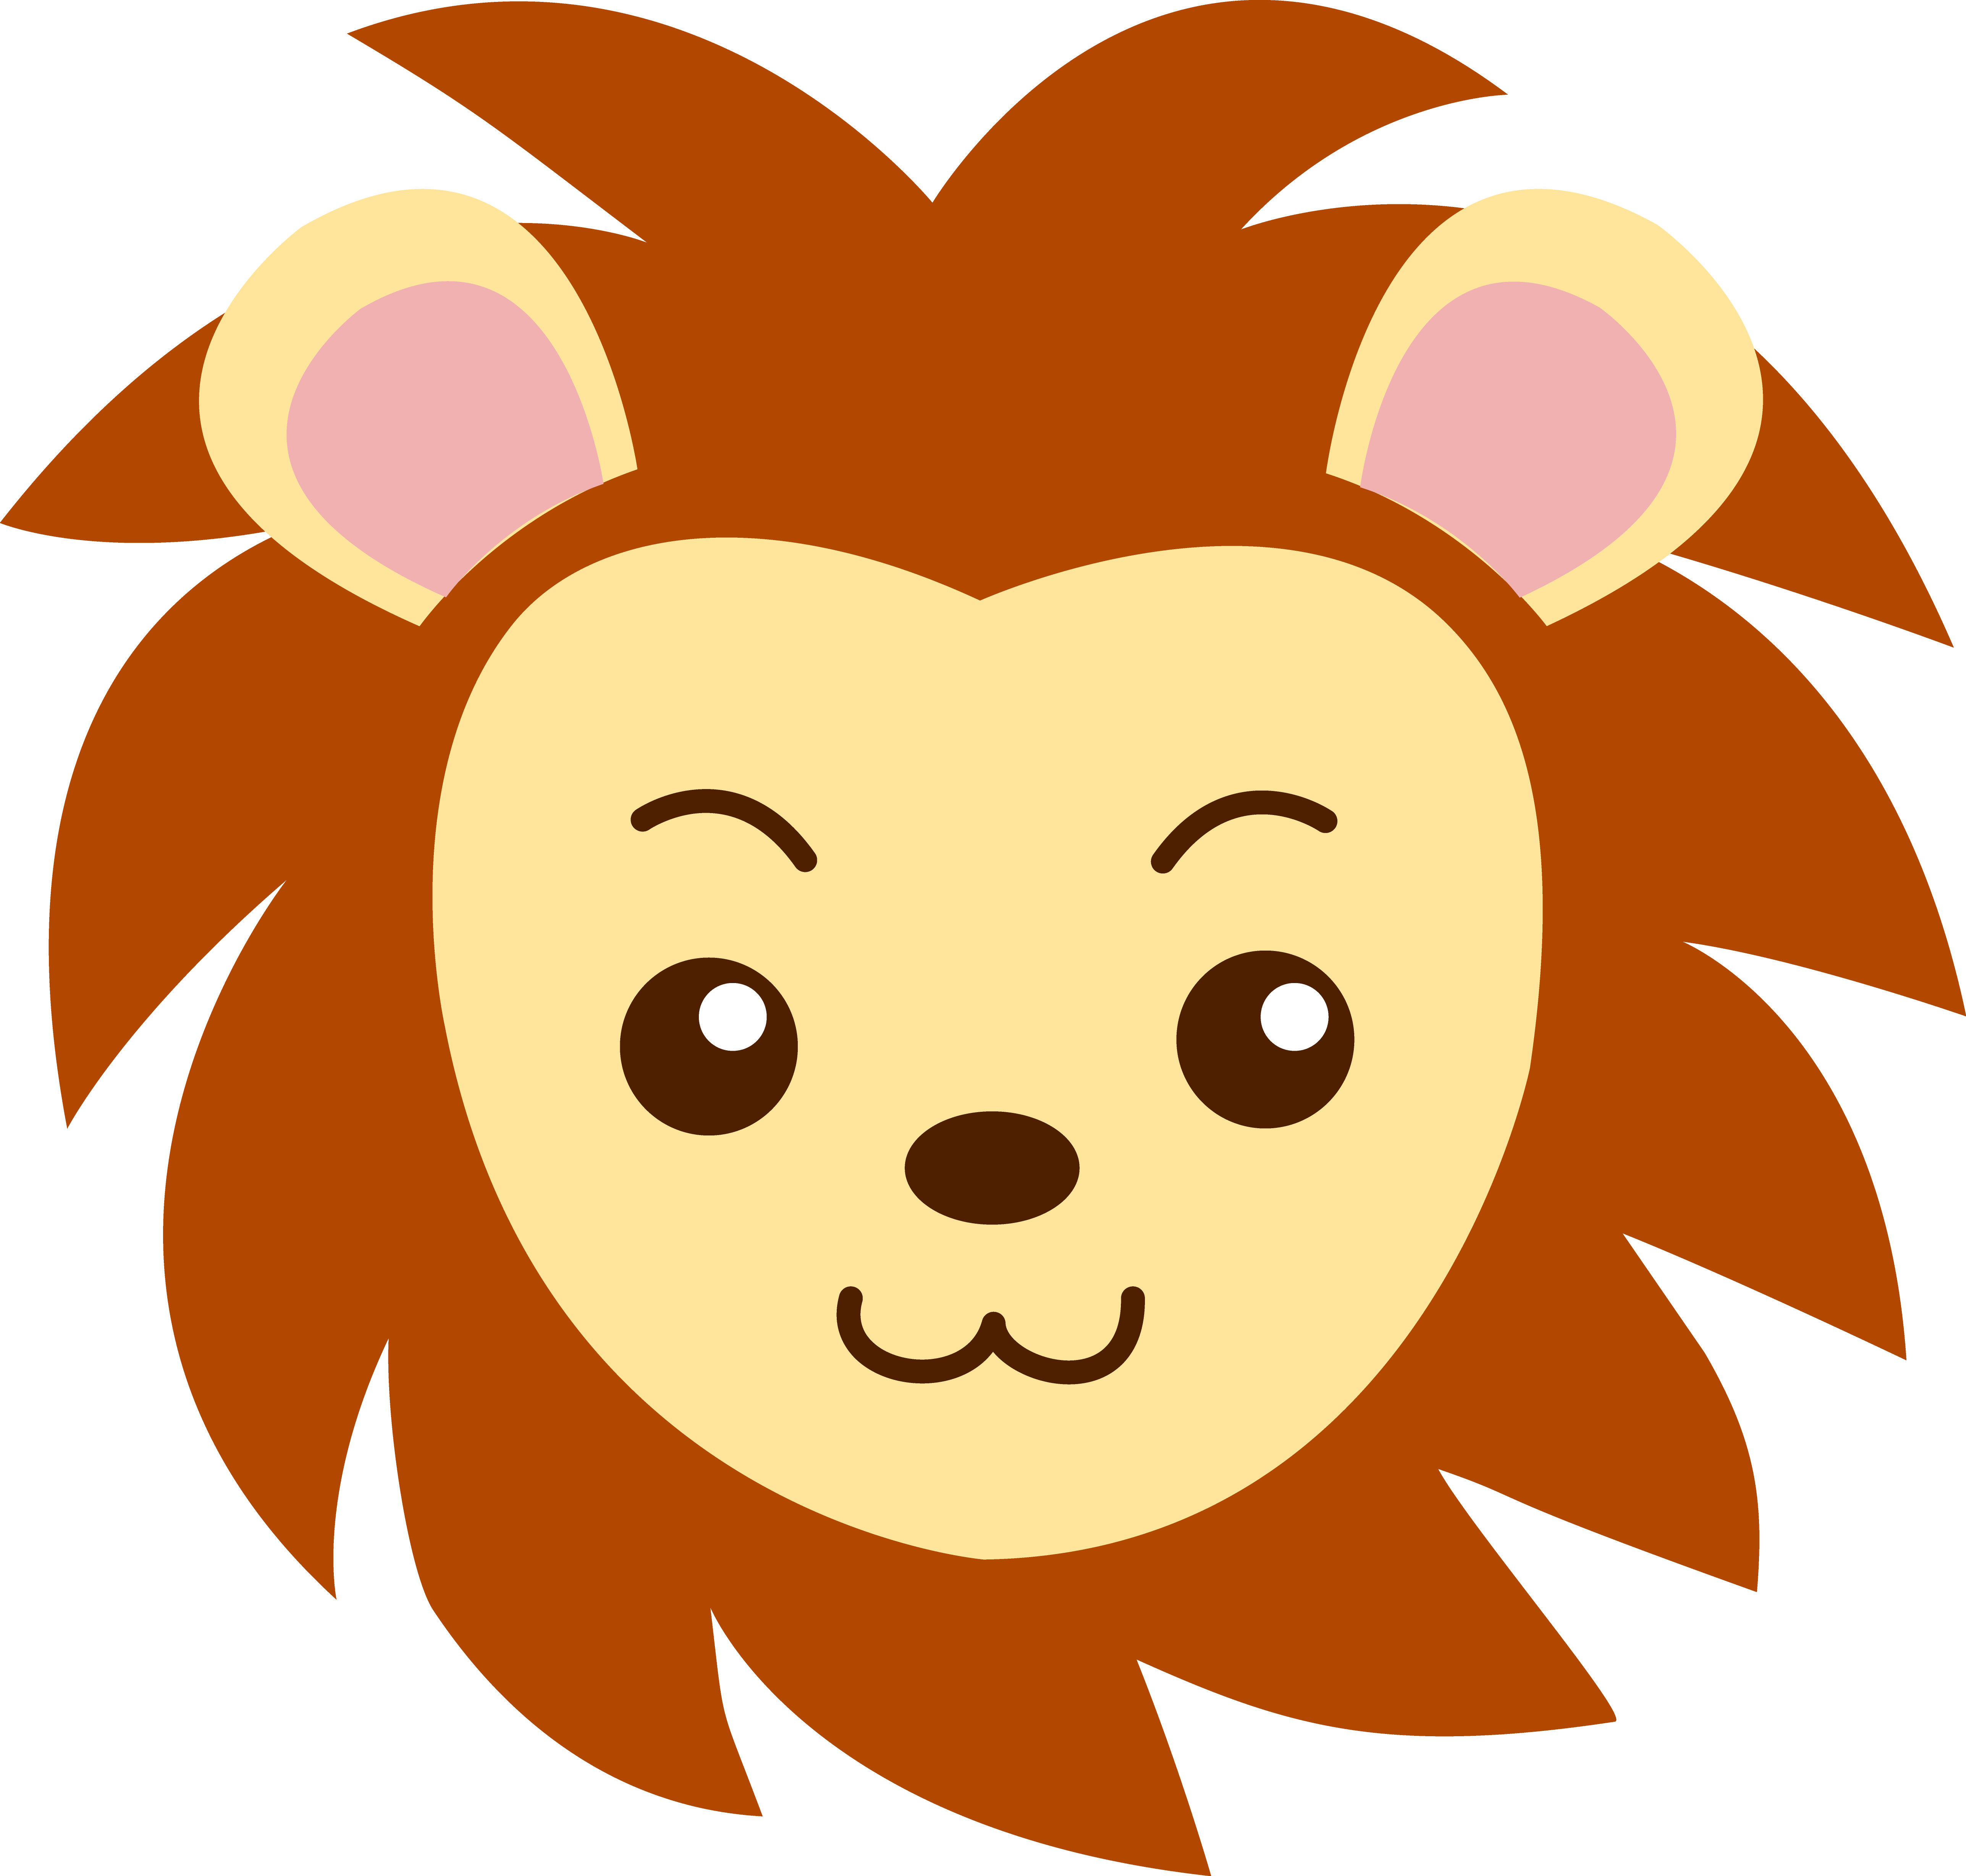 Free Animal Faces Cliparts, Download Free Clip Art, Free ...